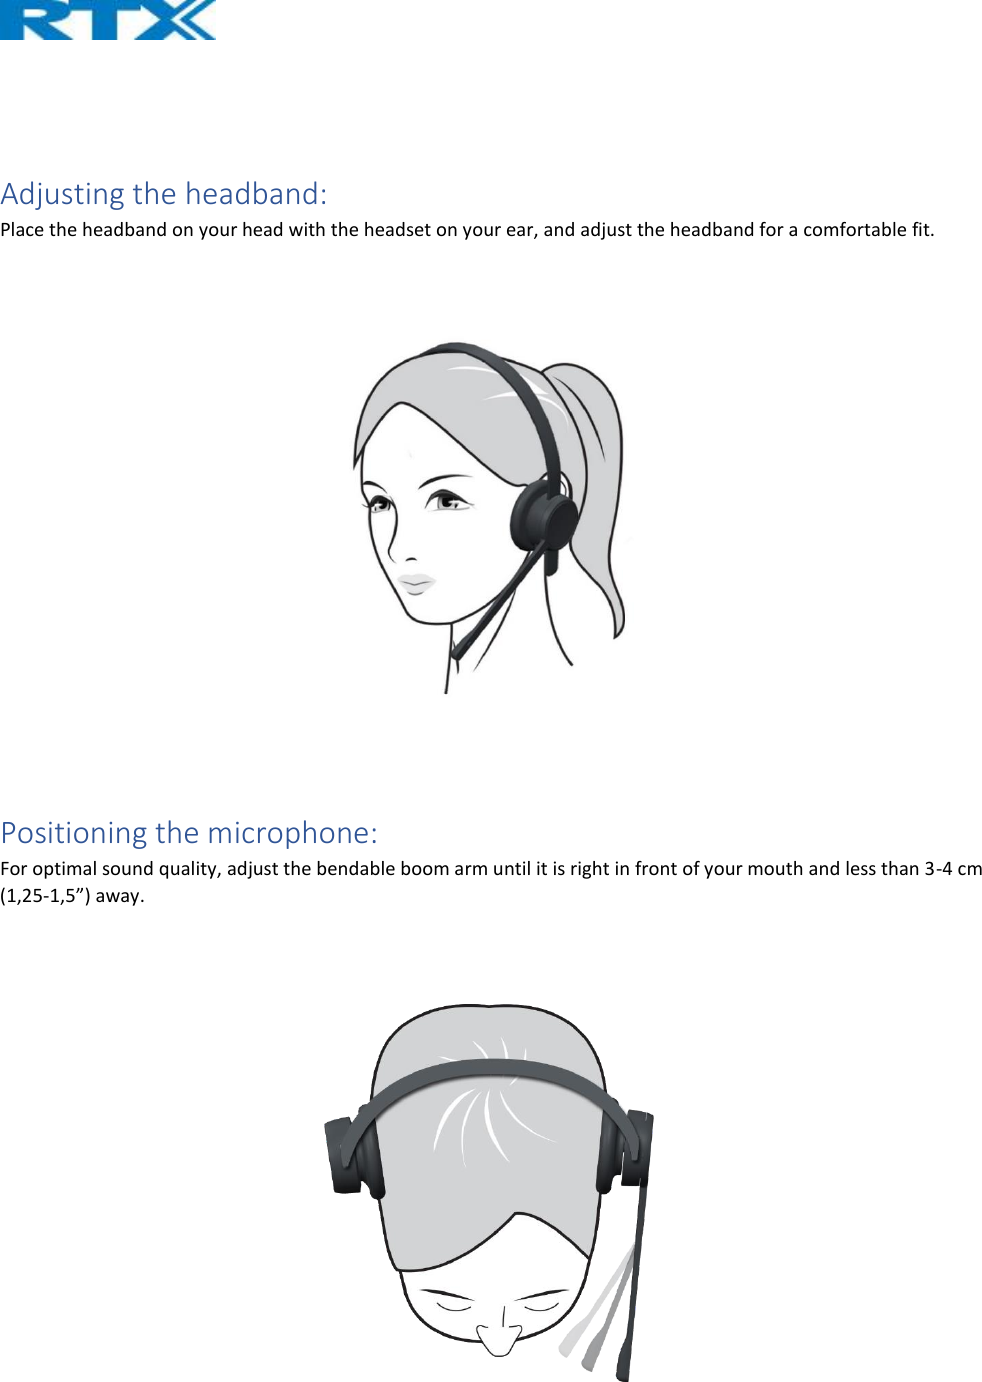    Adjusting the headband: Place the headband on your head with the headset on your ear, and adjust the headband for a comfortable fit.   Positioning the microphone: For optimal sound quality, adjust the bendable boom arm until it is right in front of your mouth and less than 3-4 cm (1,25-1,5”) away.  